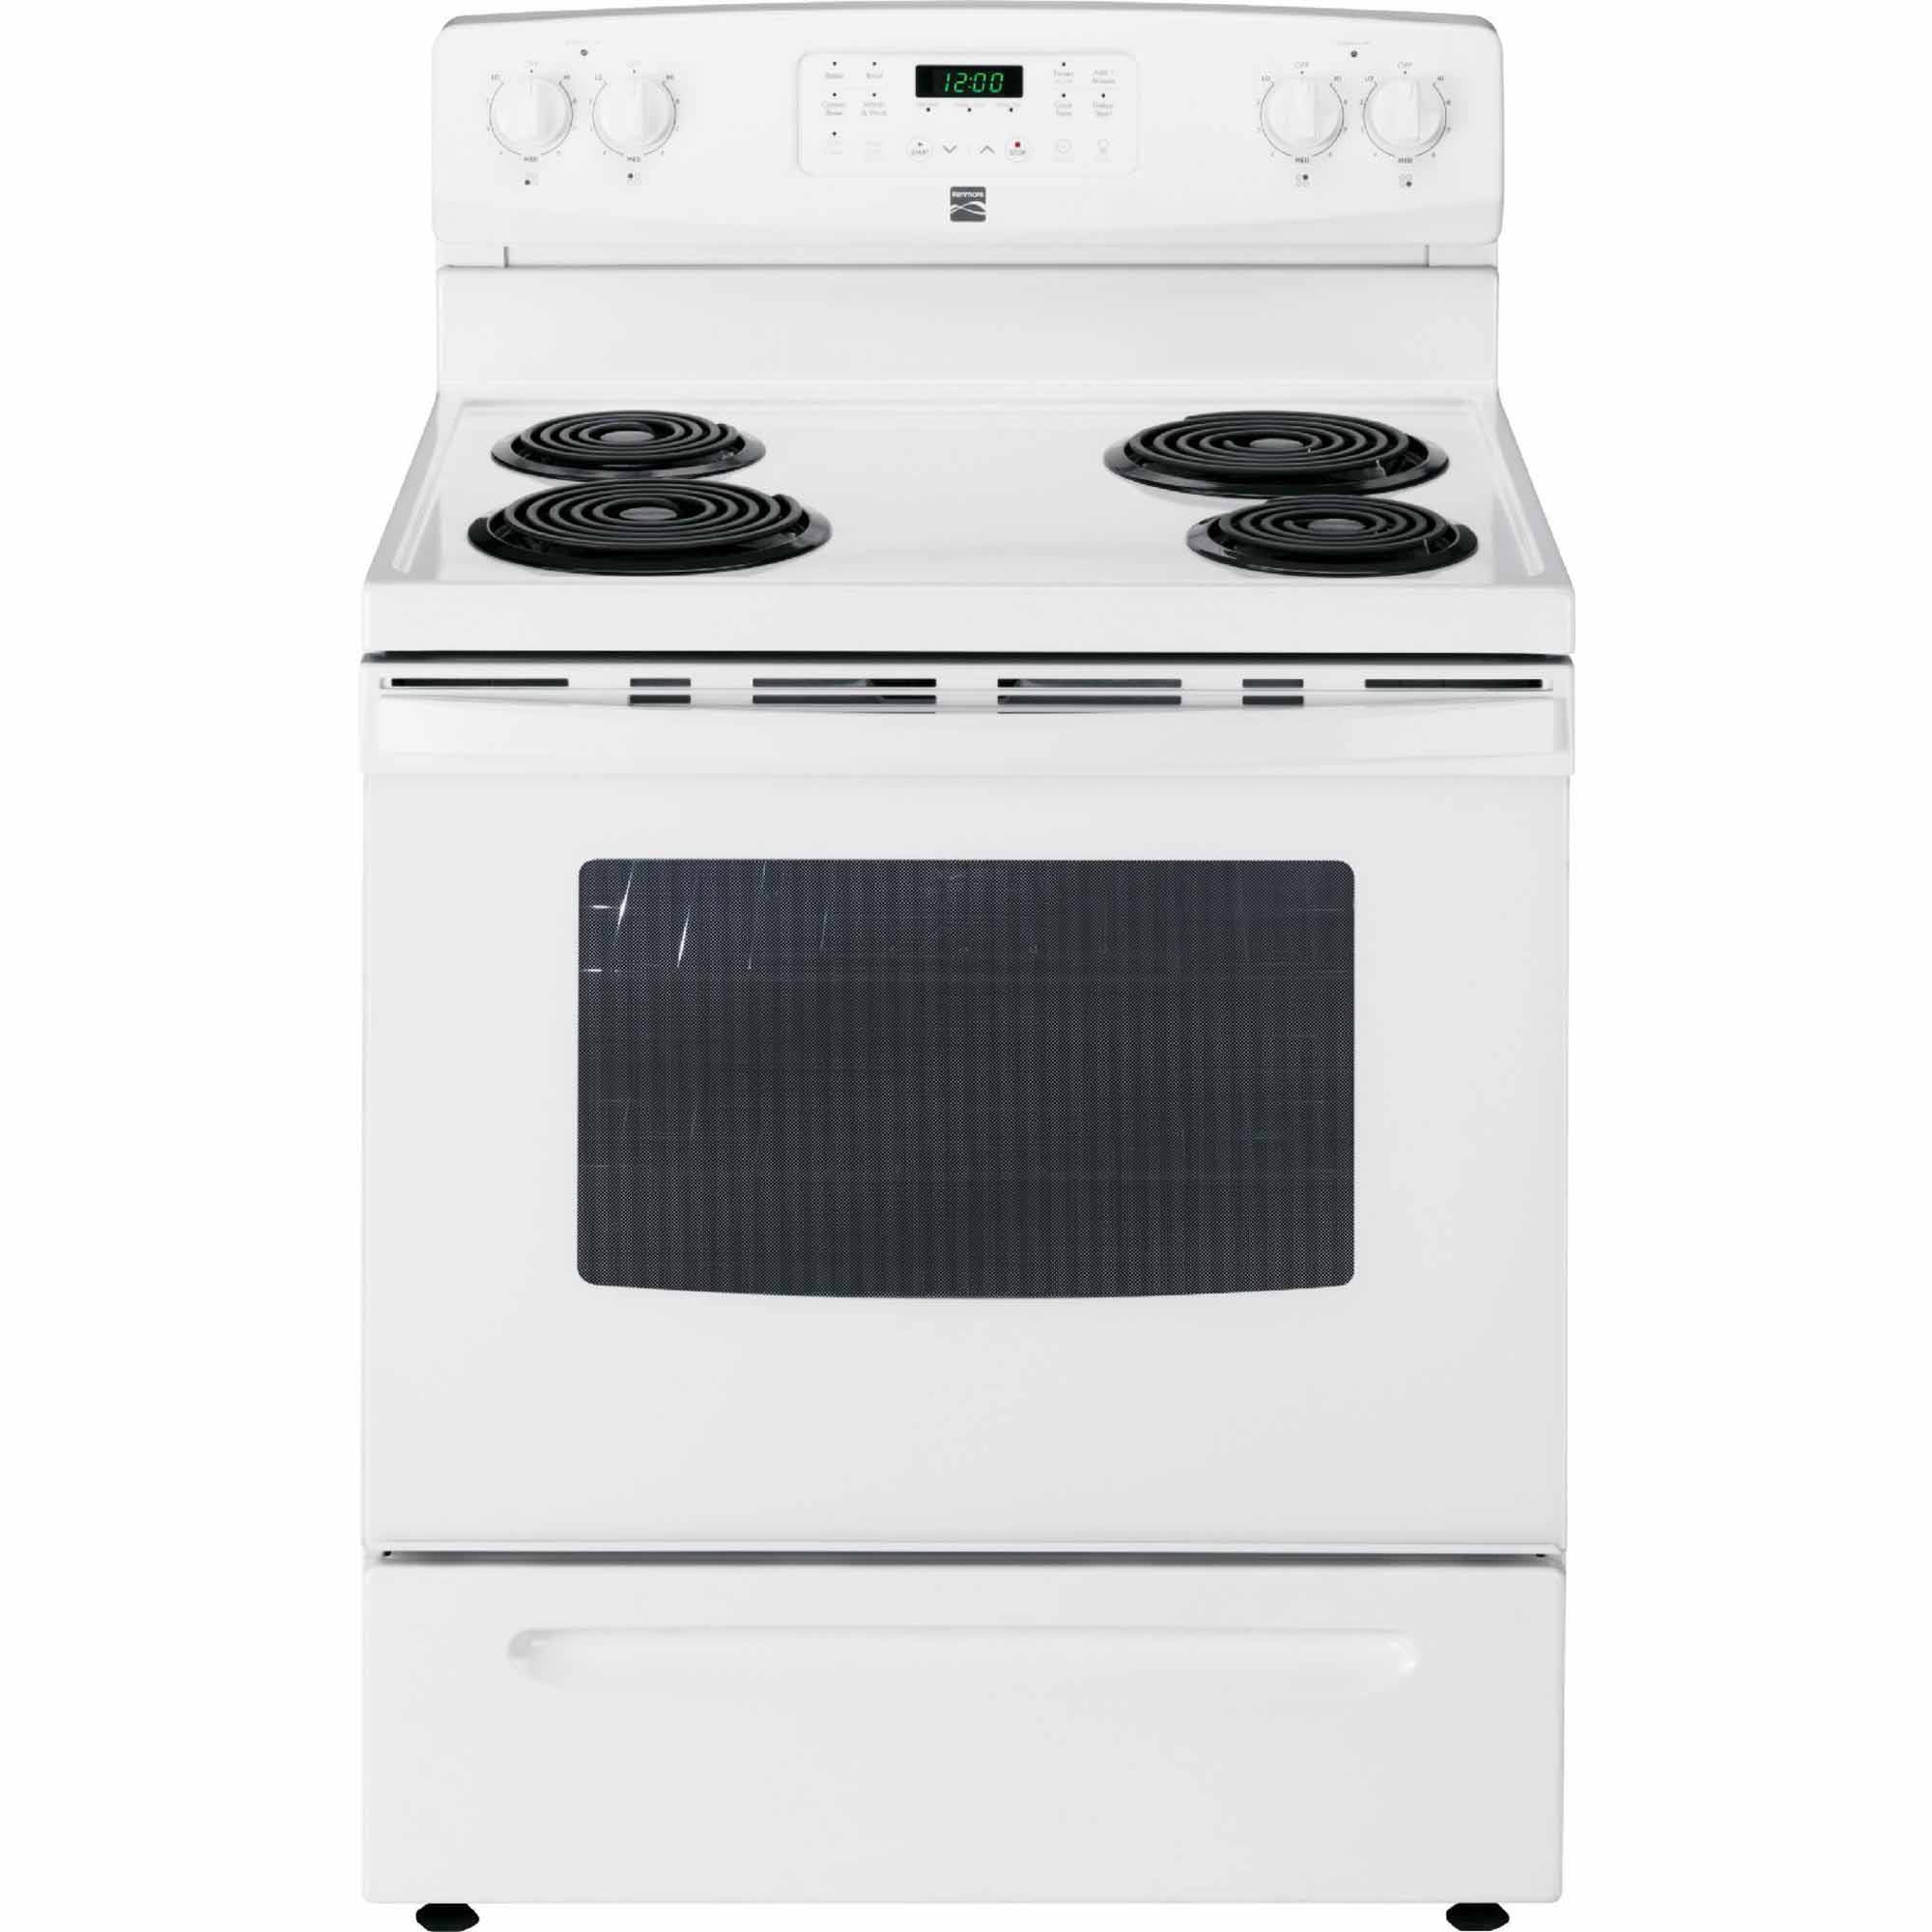 0012505508080 - 94152 5.4 CU. FT. SELF-CLEANING ELECTRIC RANGE W / CONVECTION OVEN - WHITE